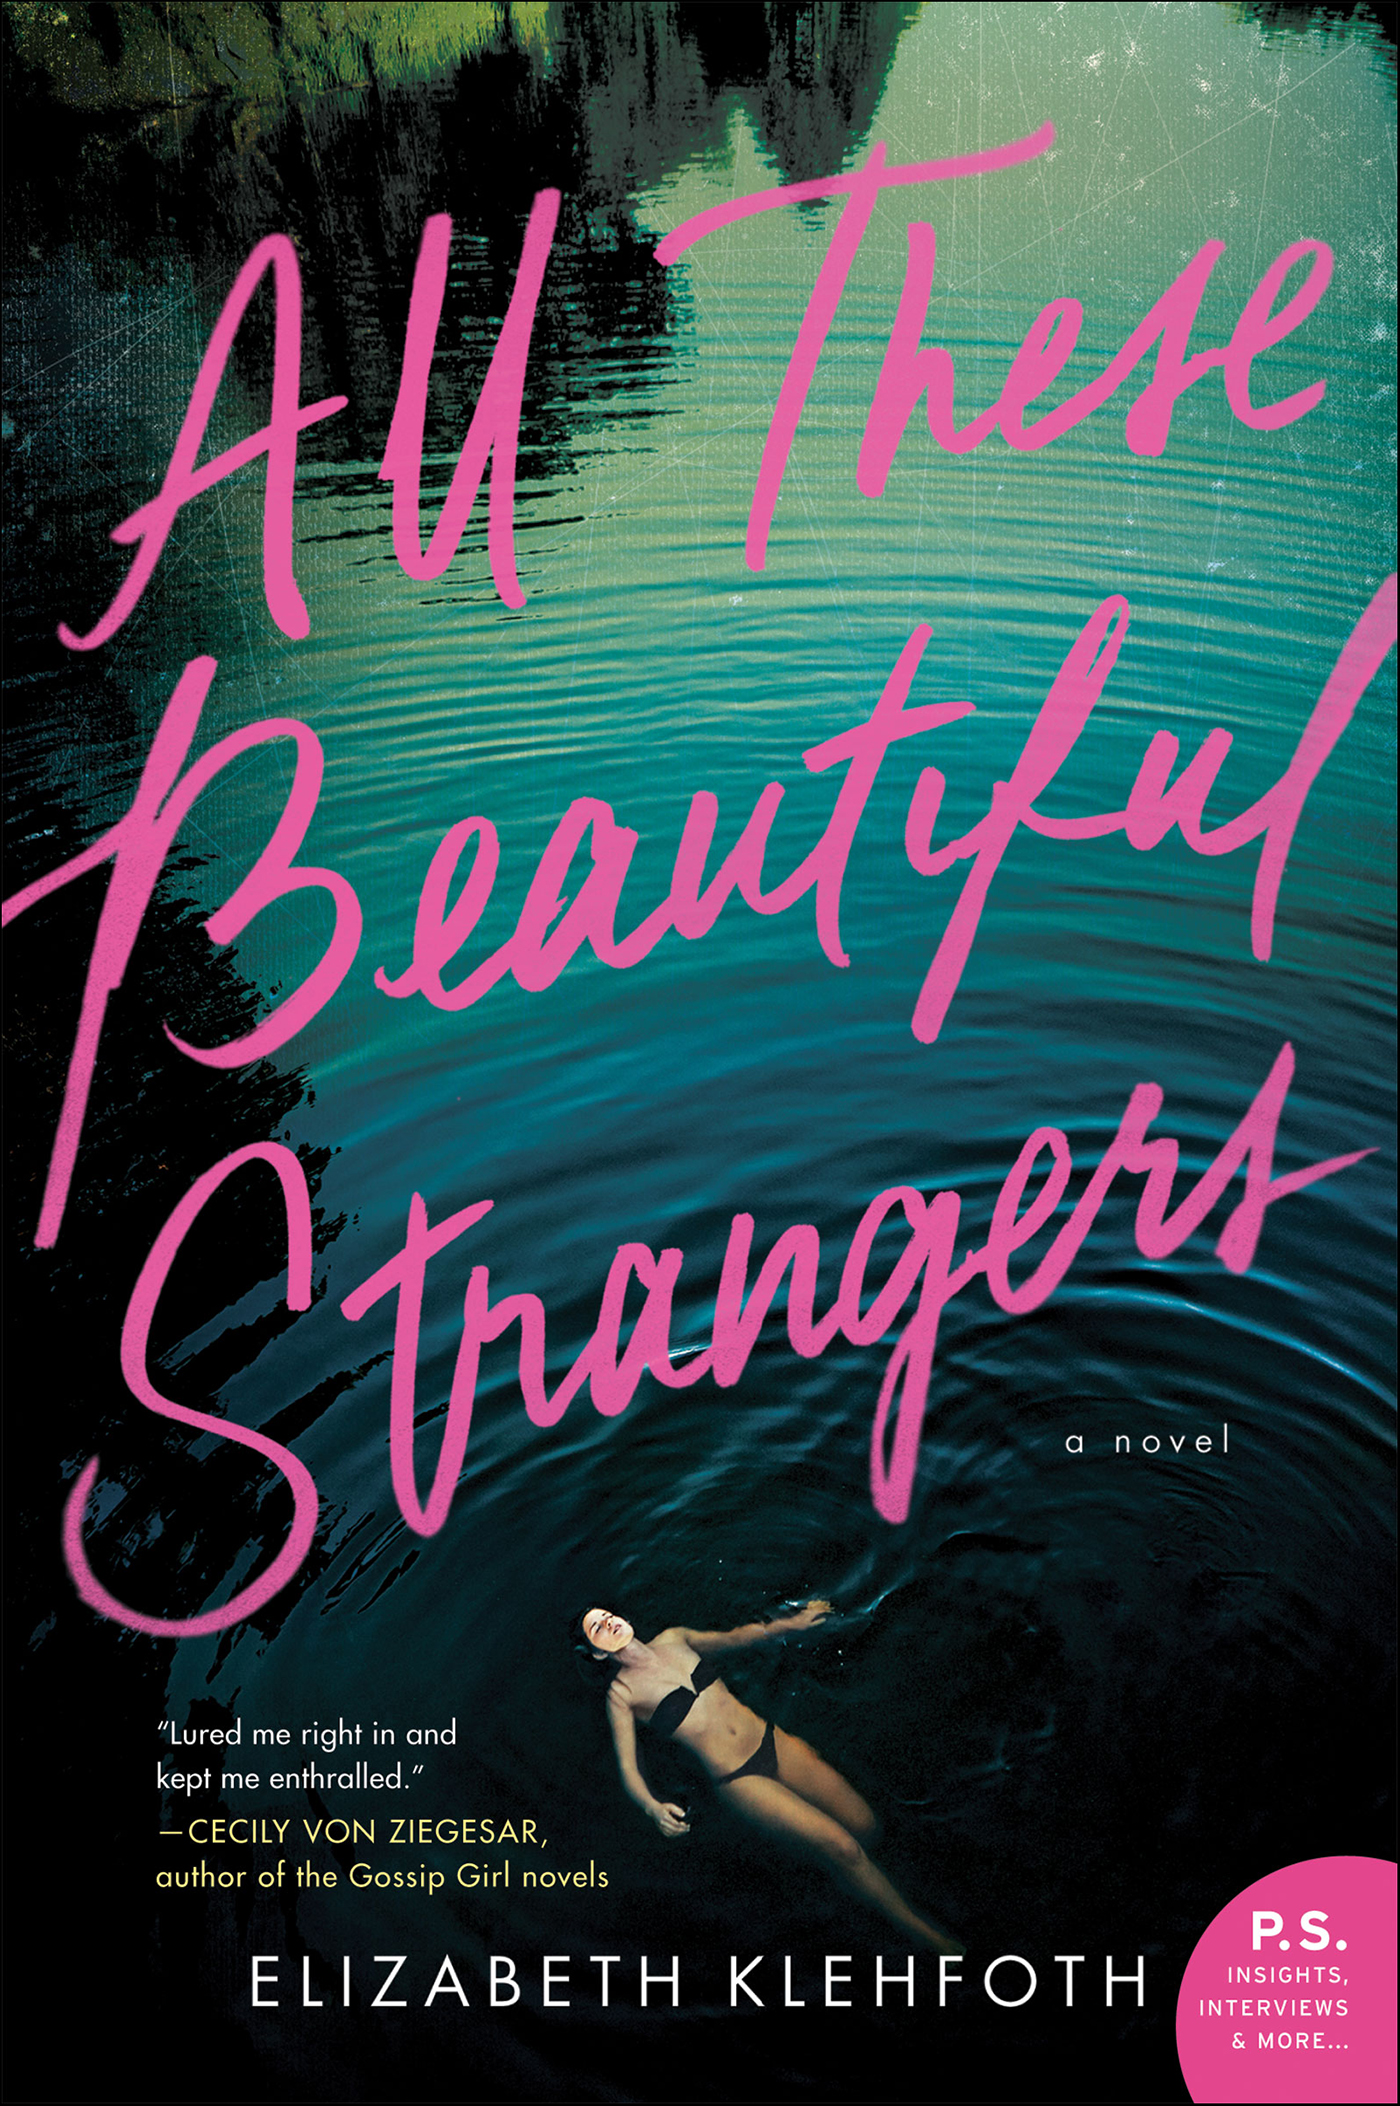 All these beautiful strangers cover image